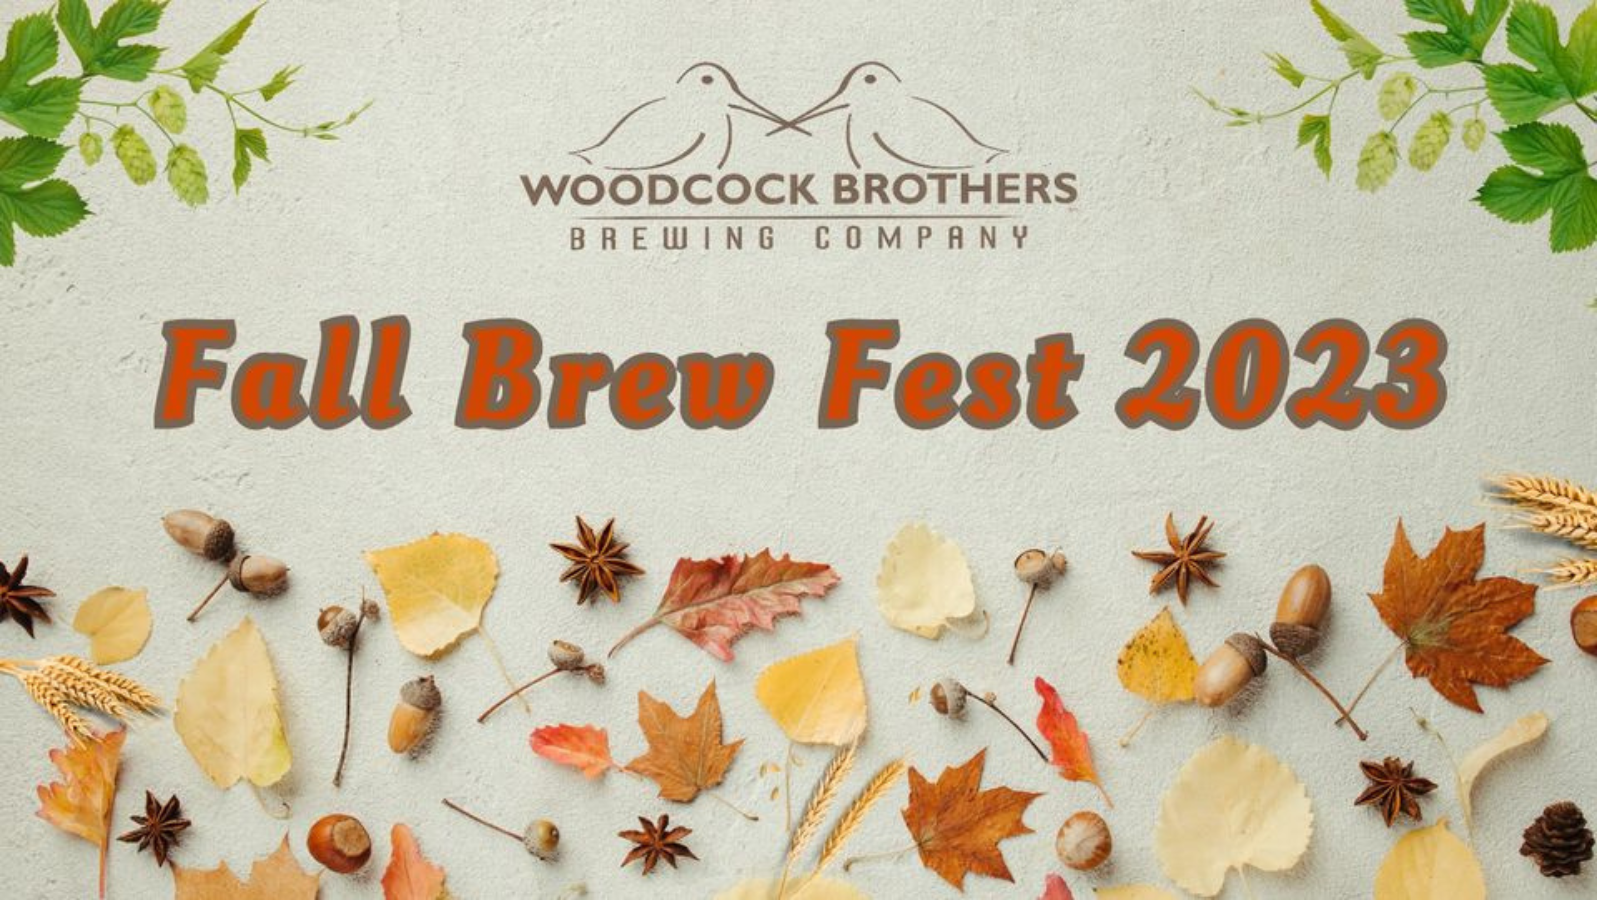 Fall Brew Fest Woodcock Brothers (Wilson)